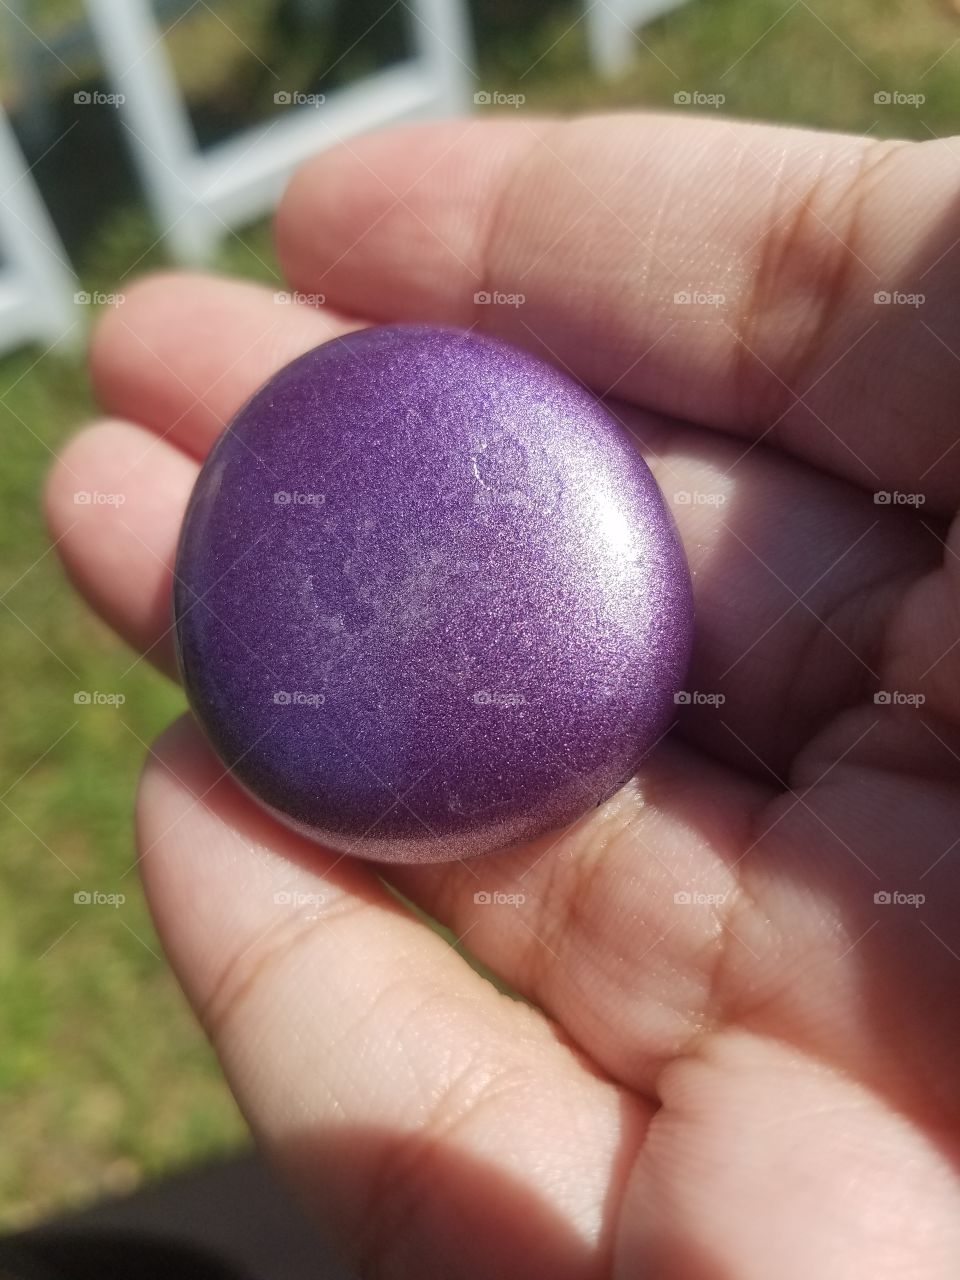 A hand holding a round, purple rock that is gleaming in the sun. The rock is fake.